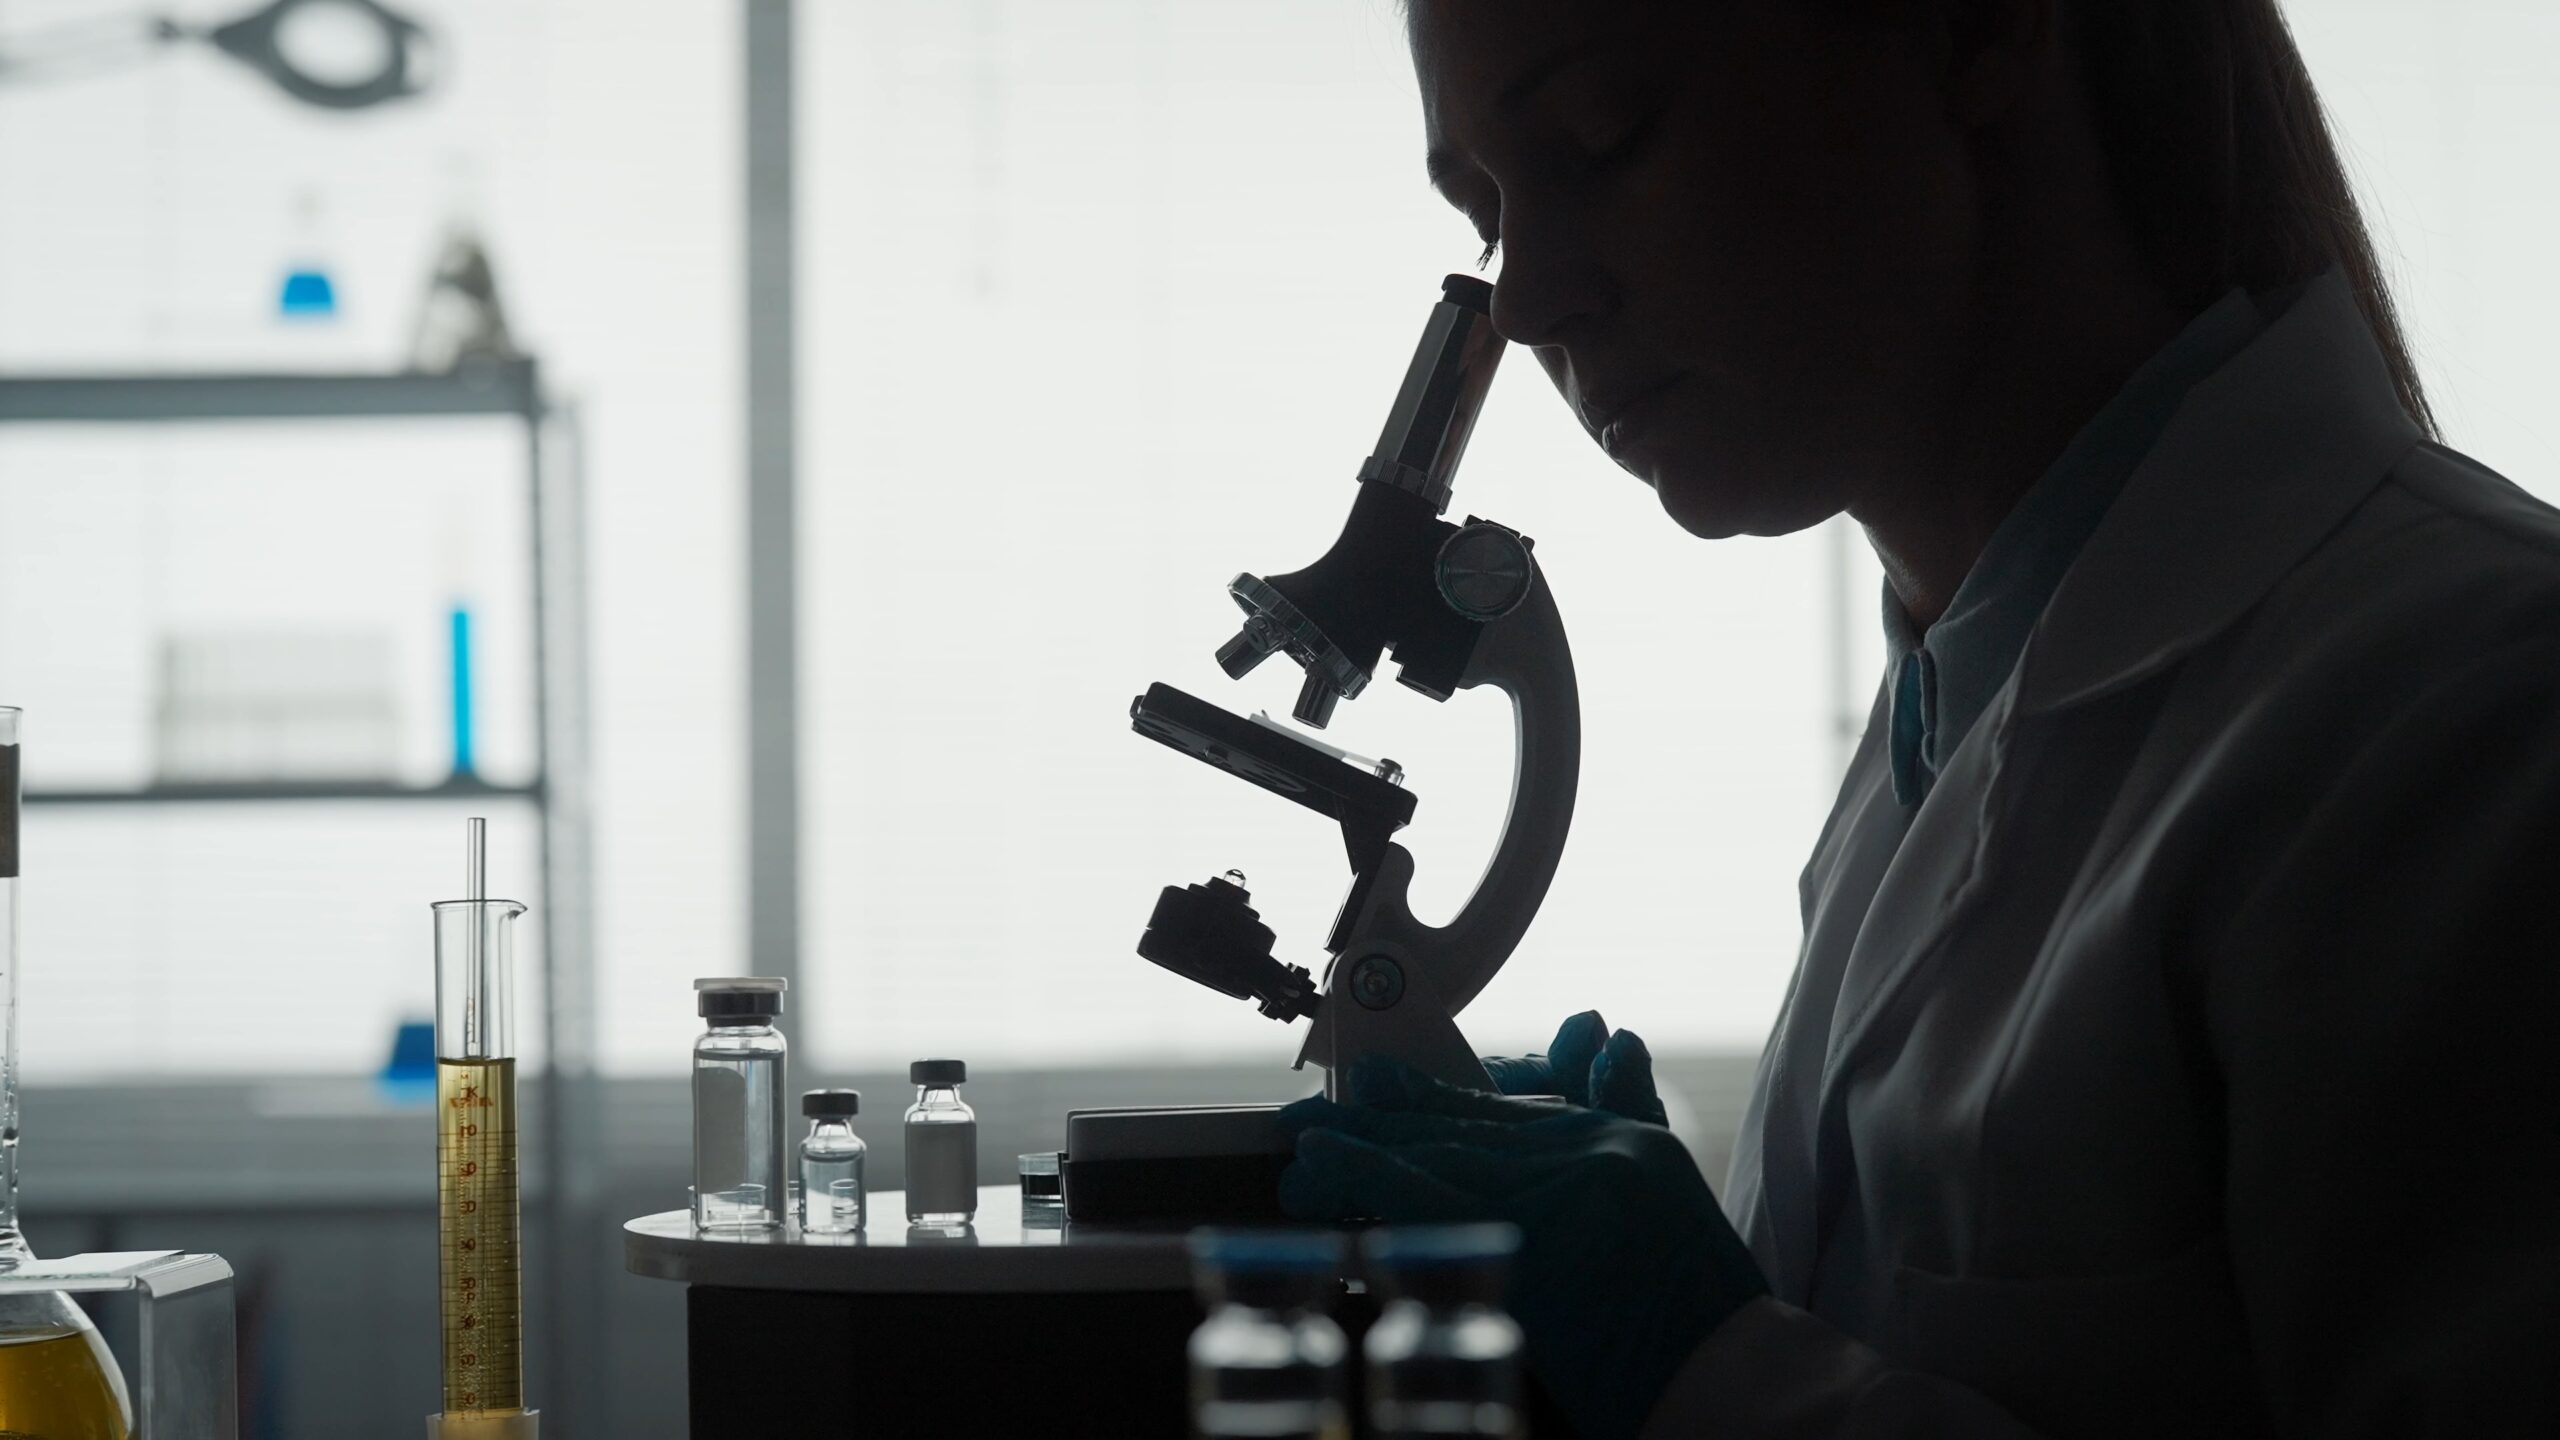 Silhouette of a woman looking into a microscope in a science lab.